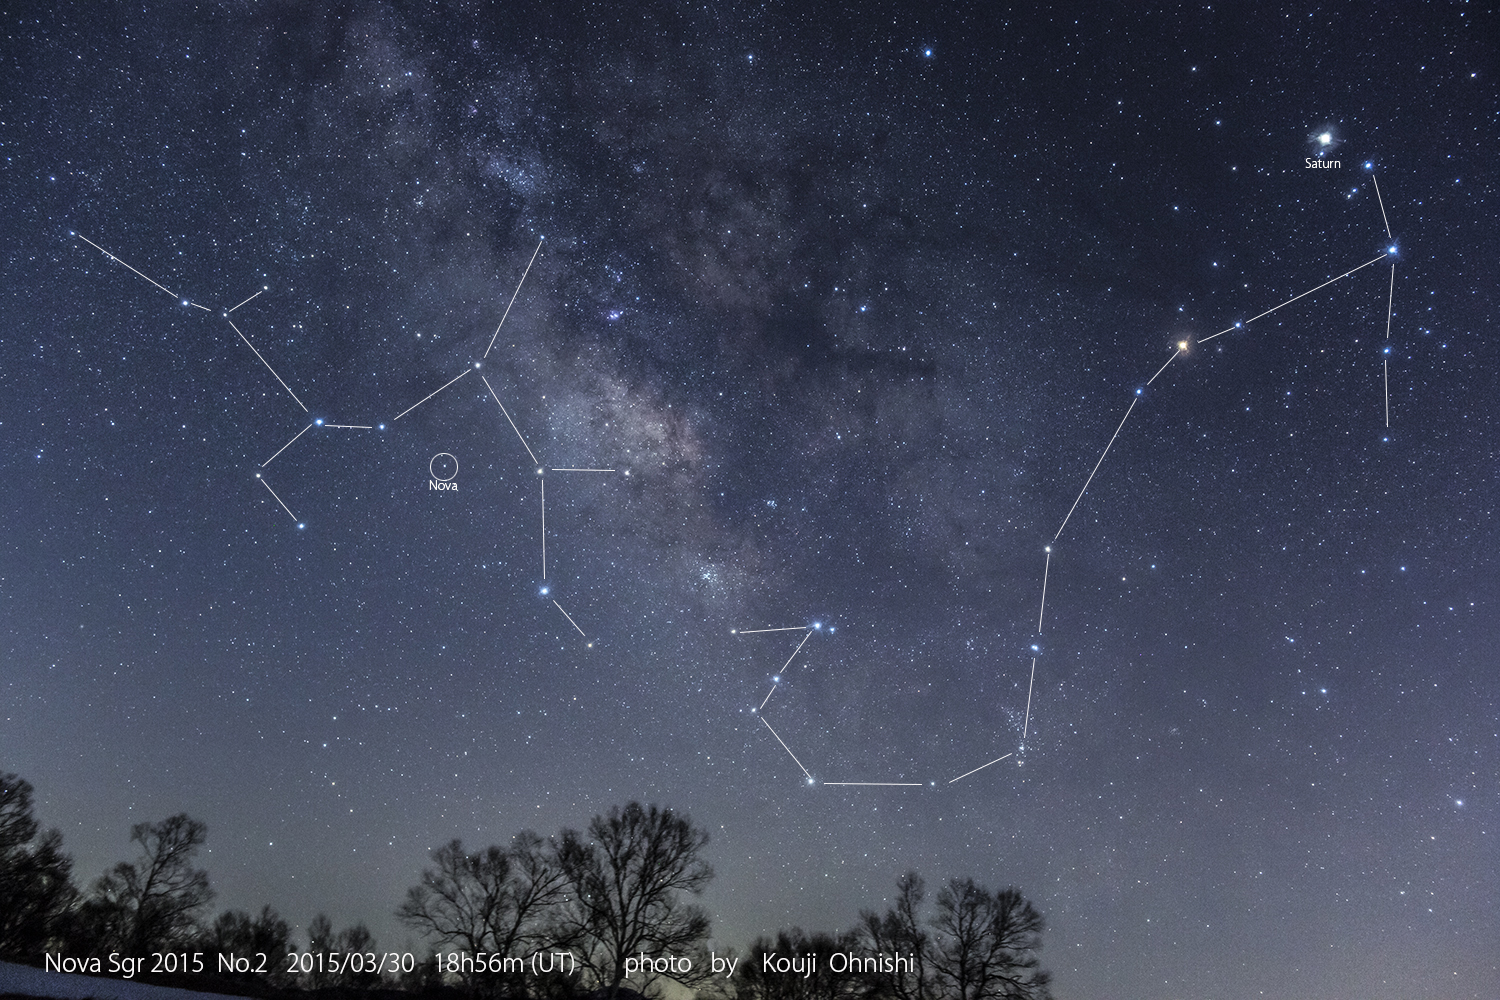 Constellations visible to the naked eye